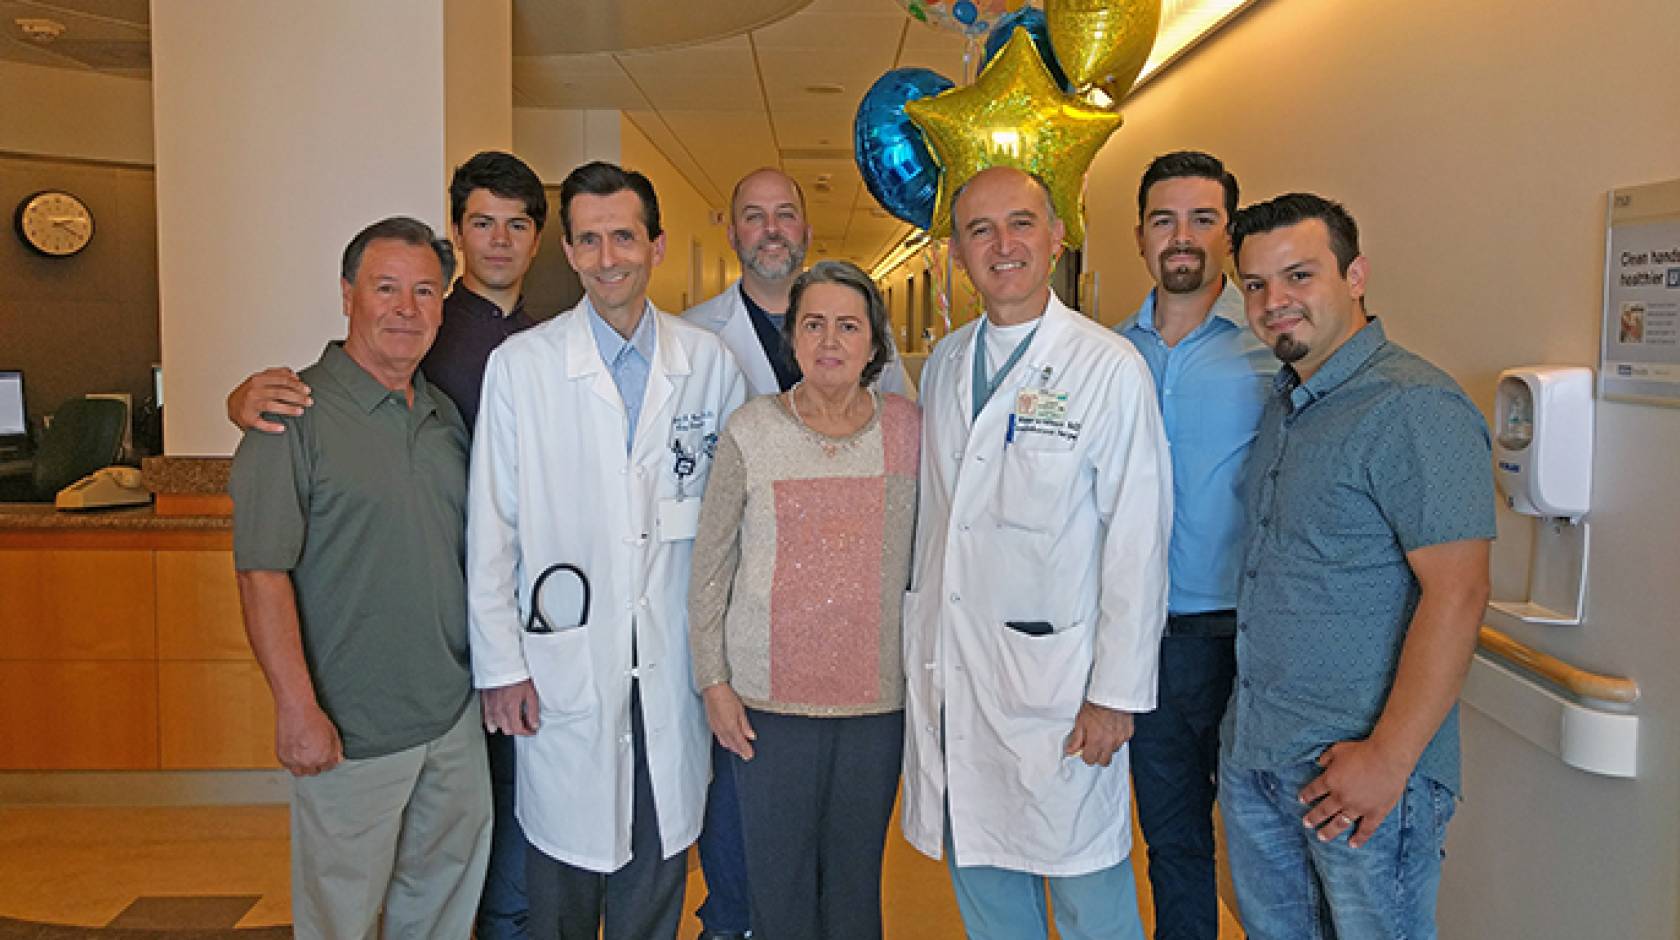 Elba De Contreras, the recipient of the 1,000th lung transplant performed at UCLA, along with members of her family and her transplant team.